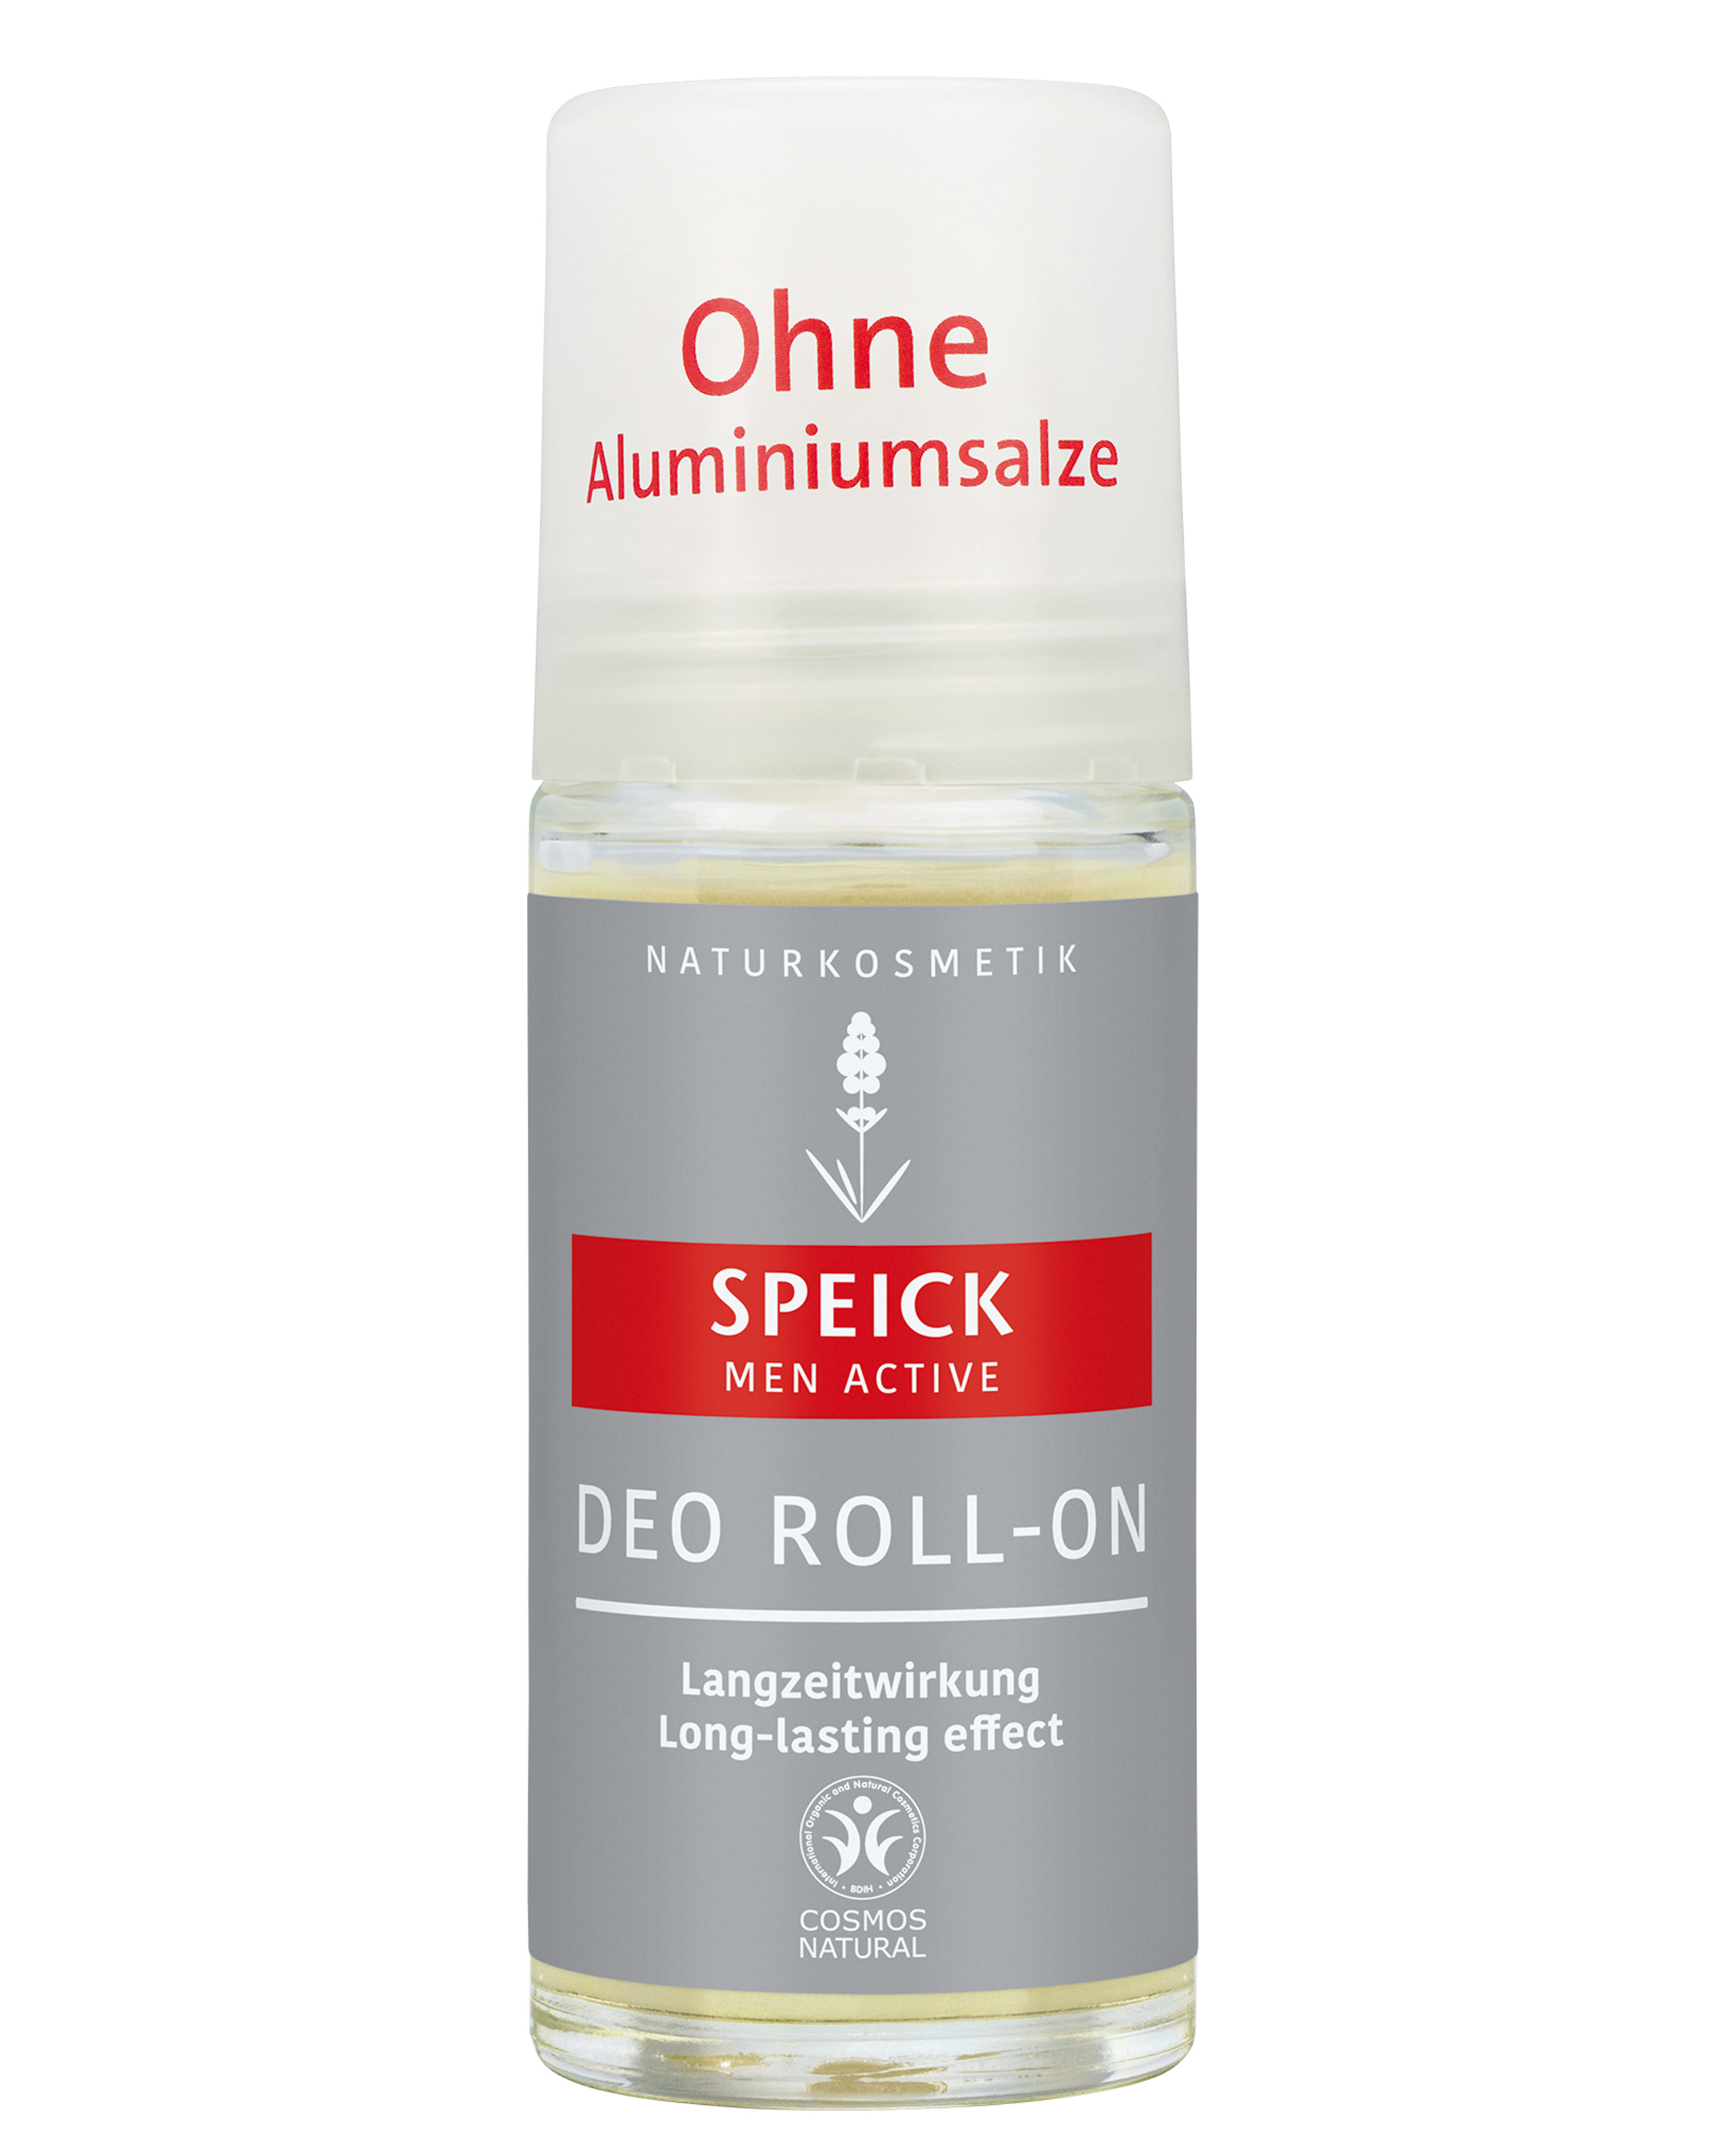 Speick Men active Deo Roll-on